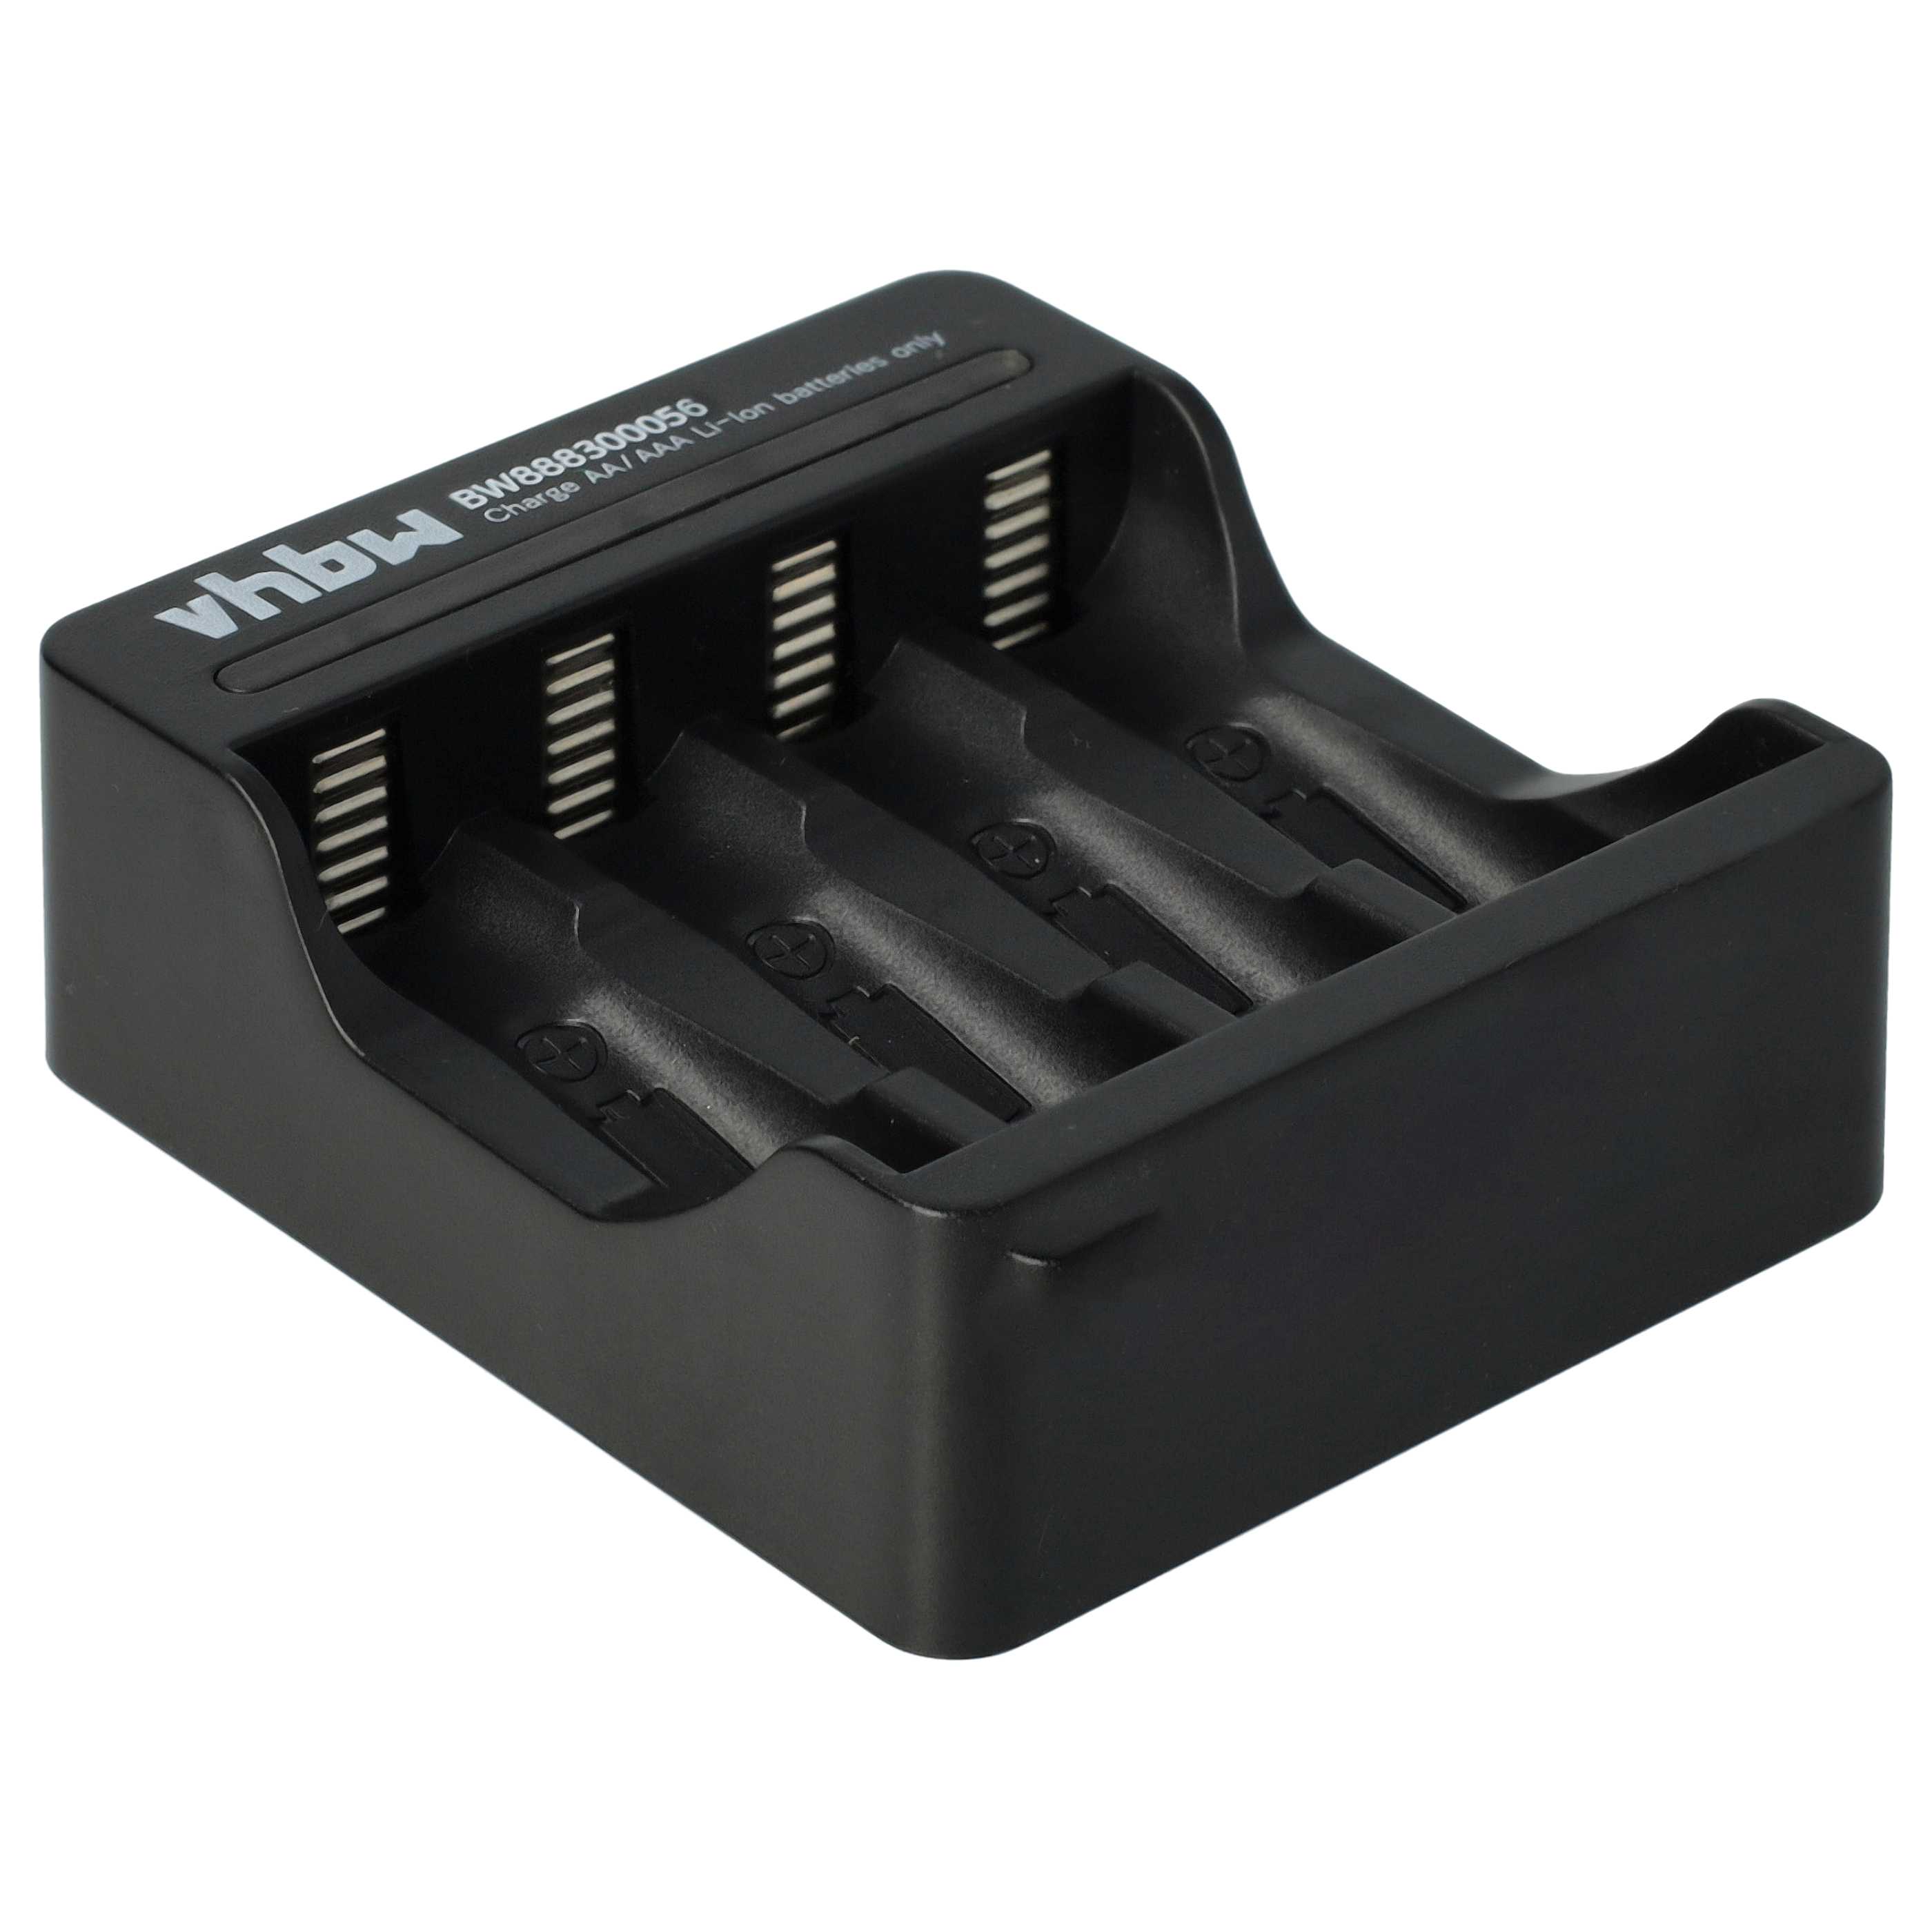 4 Slot Micro USB Charger suitable for AA, AAA Li-Ion Battery Cells